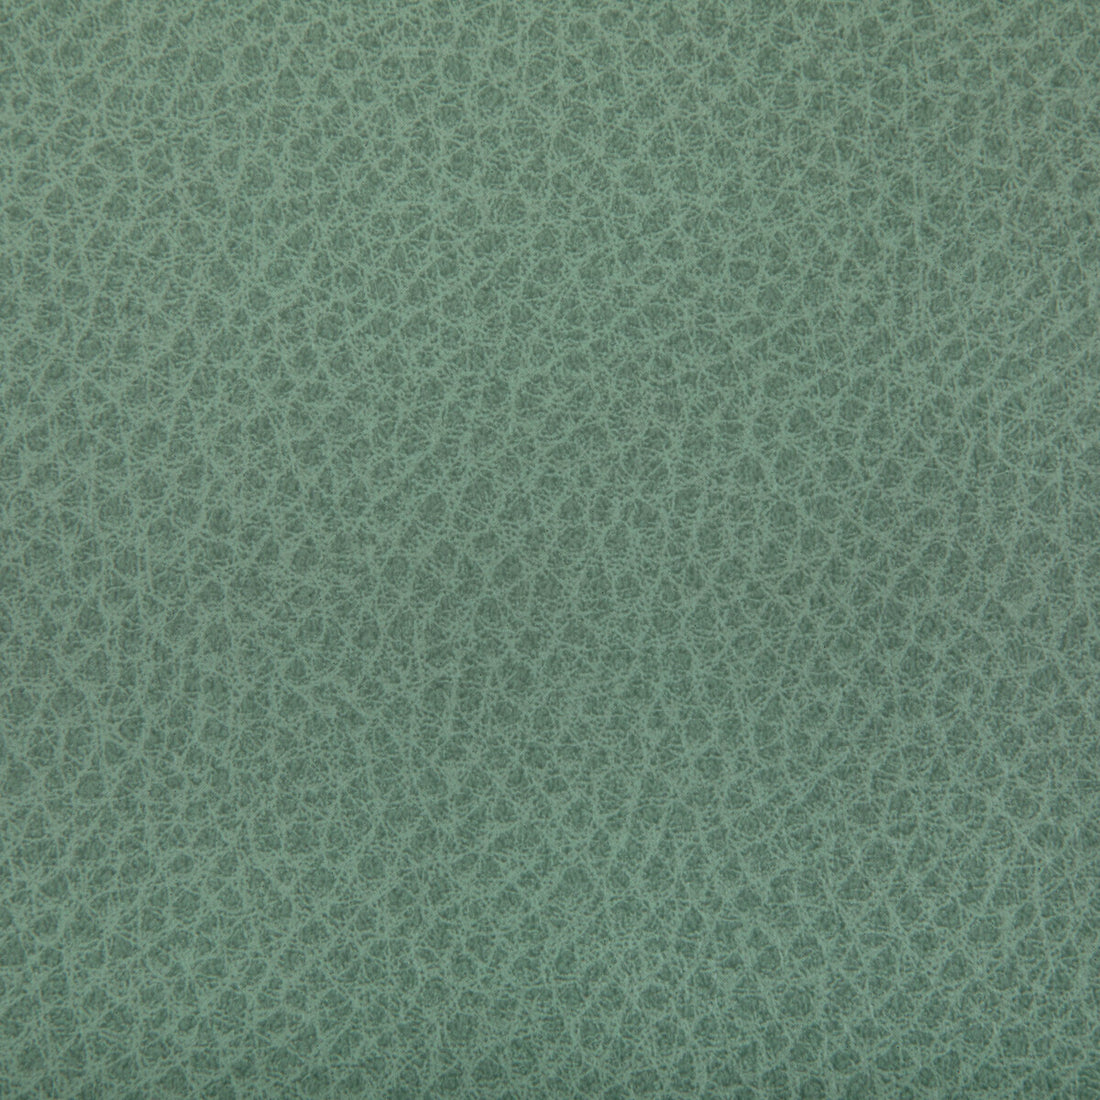 Woolf fabric in julep color - pattern WOOLF.130.0 - by Kravet Contract